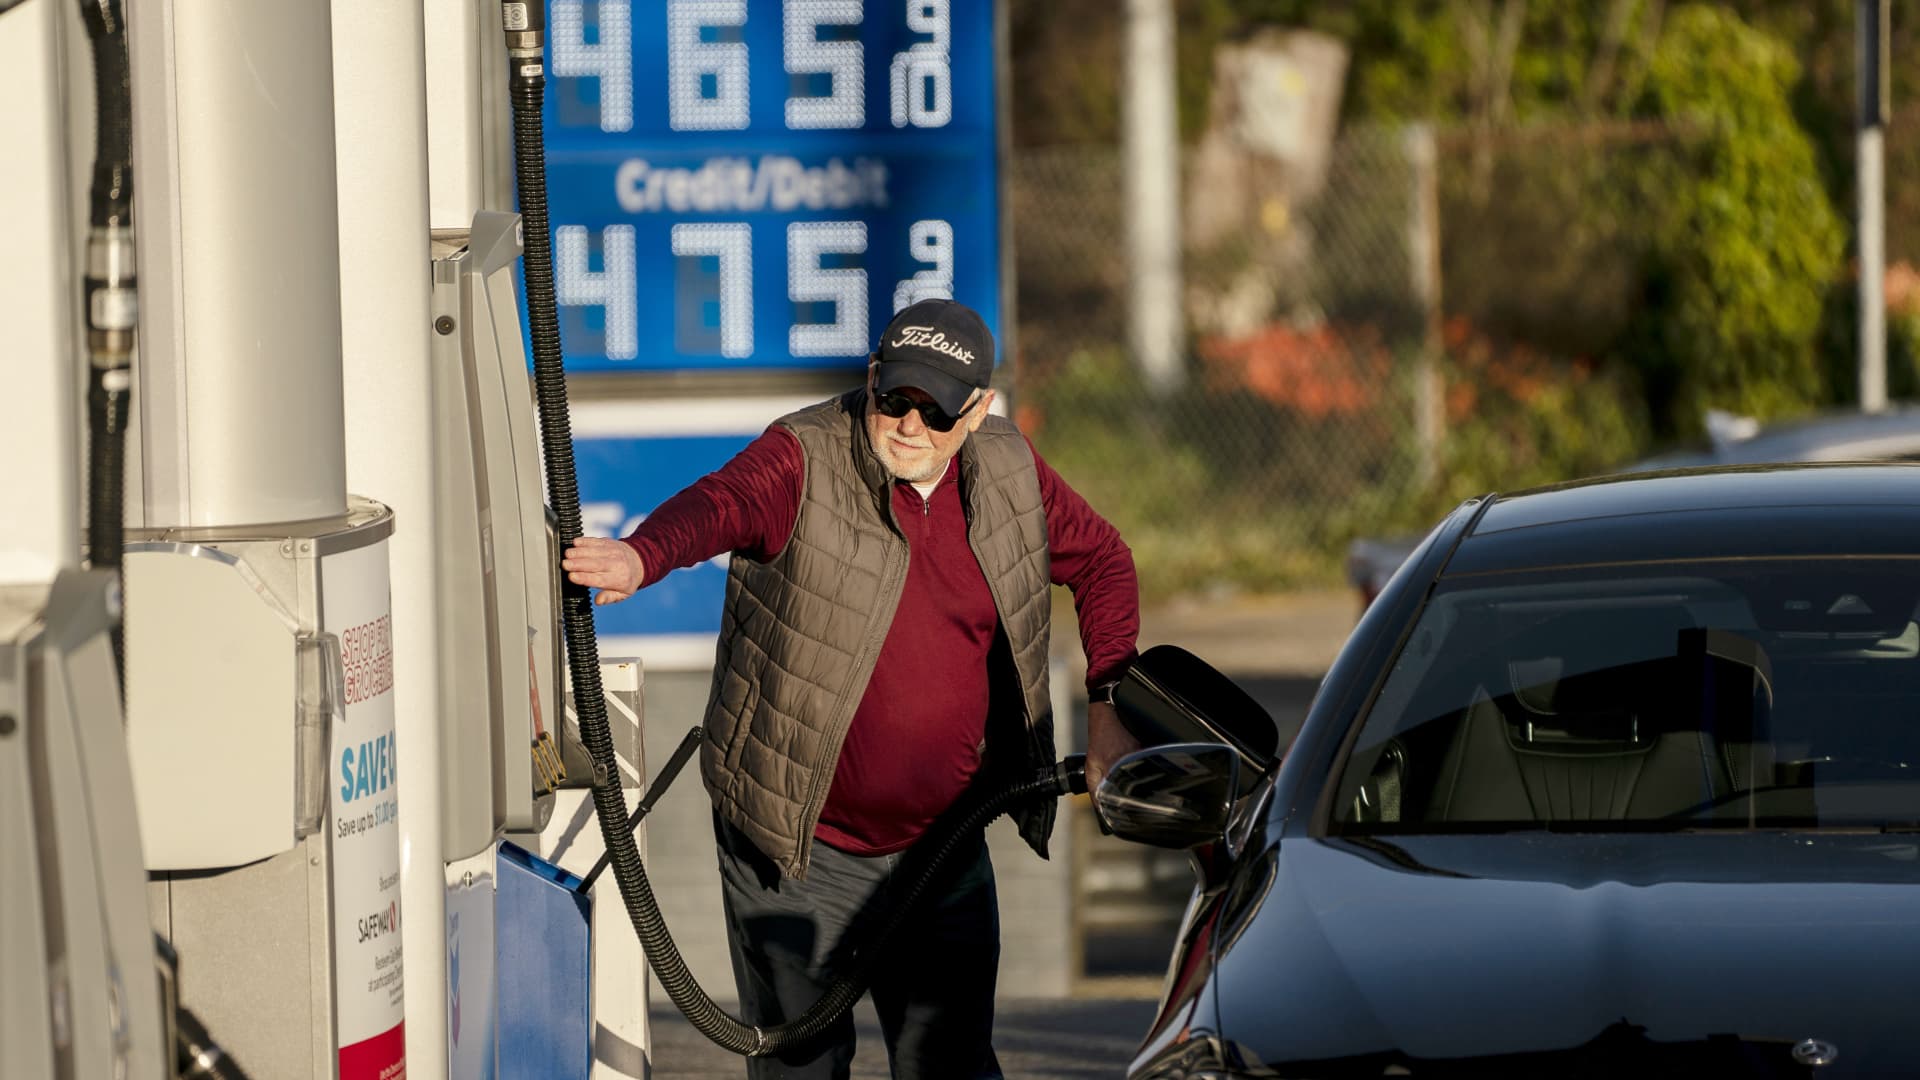 National average for gasoline hits record $4.37 a gallon